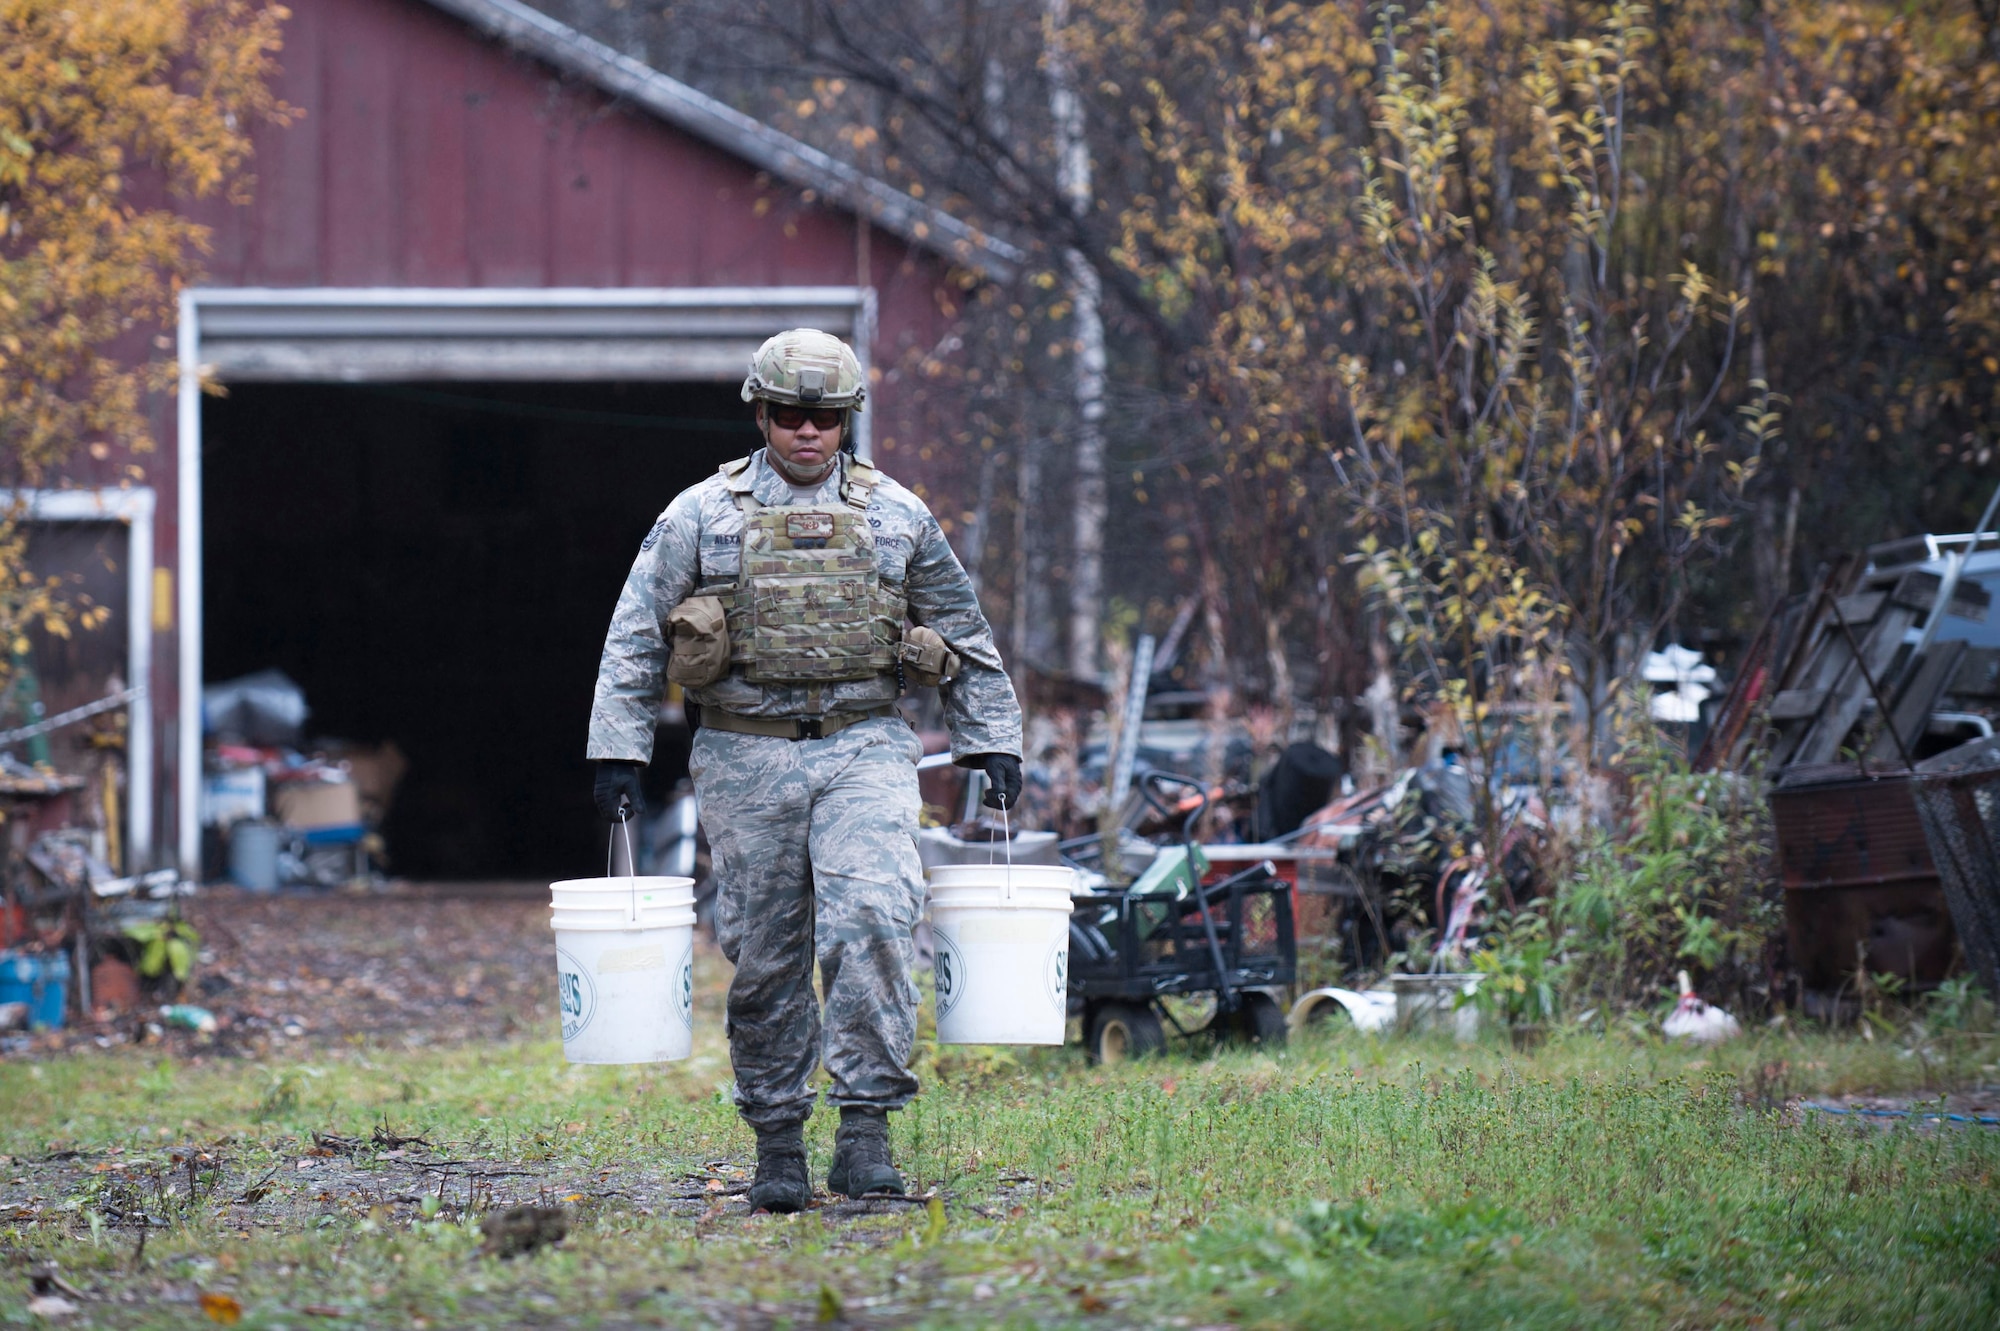 Tech. Sgt. Michael Alexander II, a 354th Civil Engineer Squadron explosive ordinance disposal technician from Eielson Air Force Base, Alaska, removes two of four buckets containing 65 sticks deteriorating dynamite from a garage in Delta Junction, Alaska, Sept. 20, 2015. The EOD flight responded to the report of explosives at the request of local authorities. (U.S. Air Force photo/Staff Sgt. Shawn Nickel)